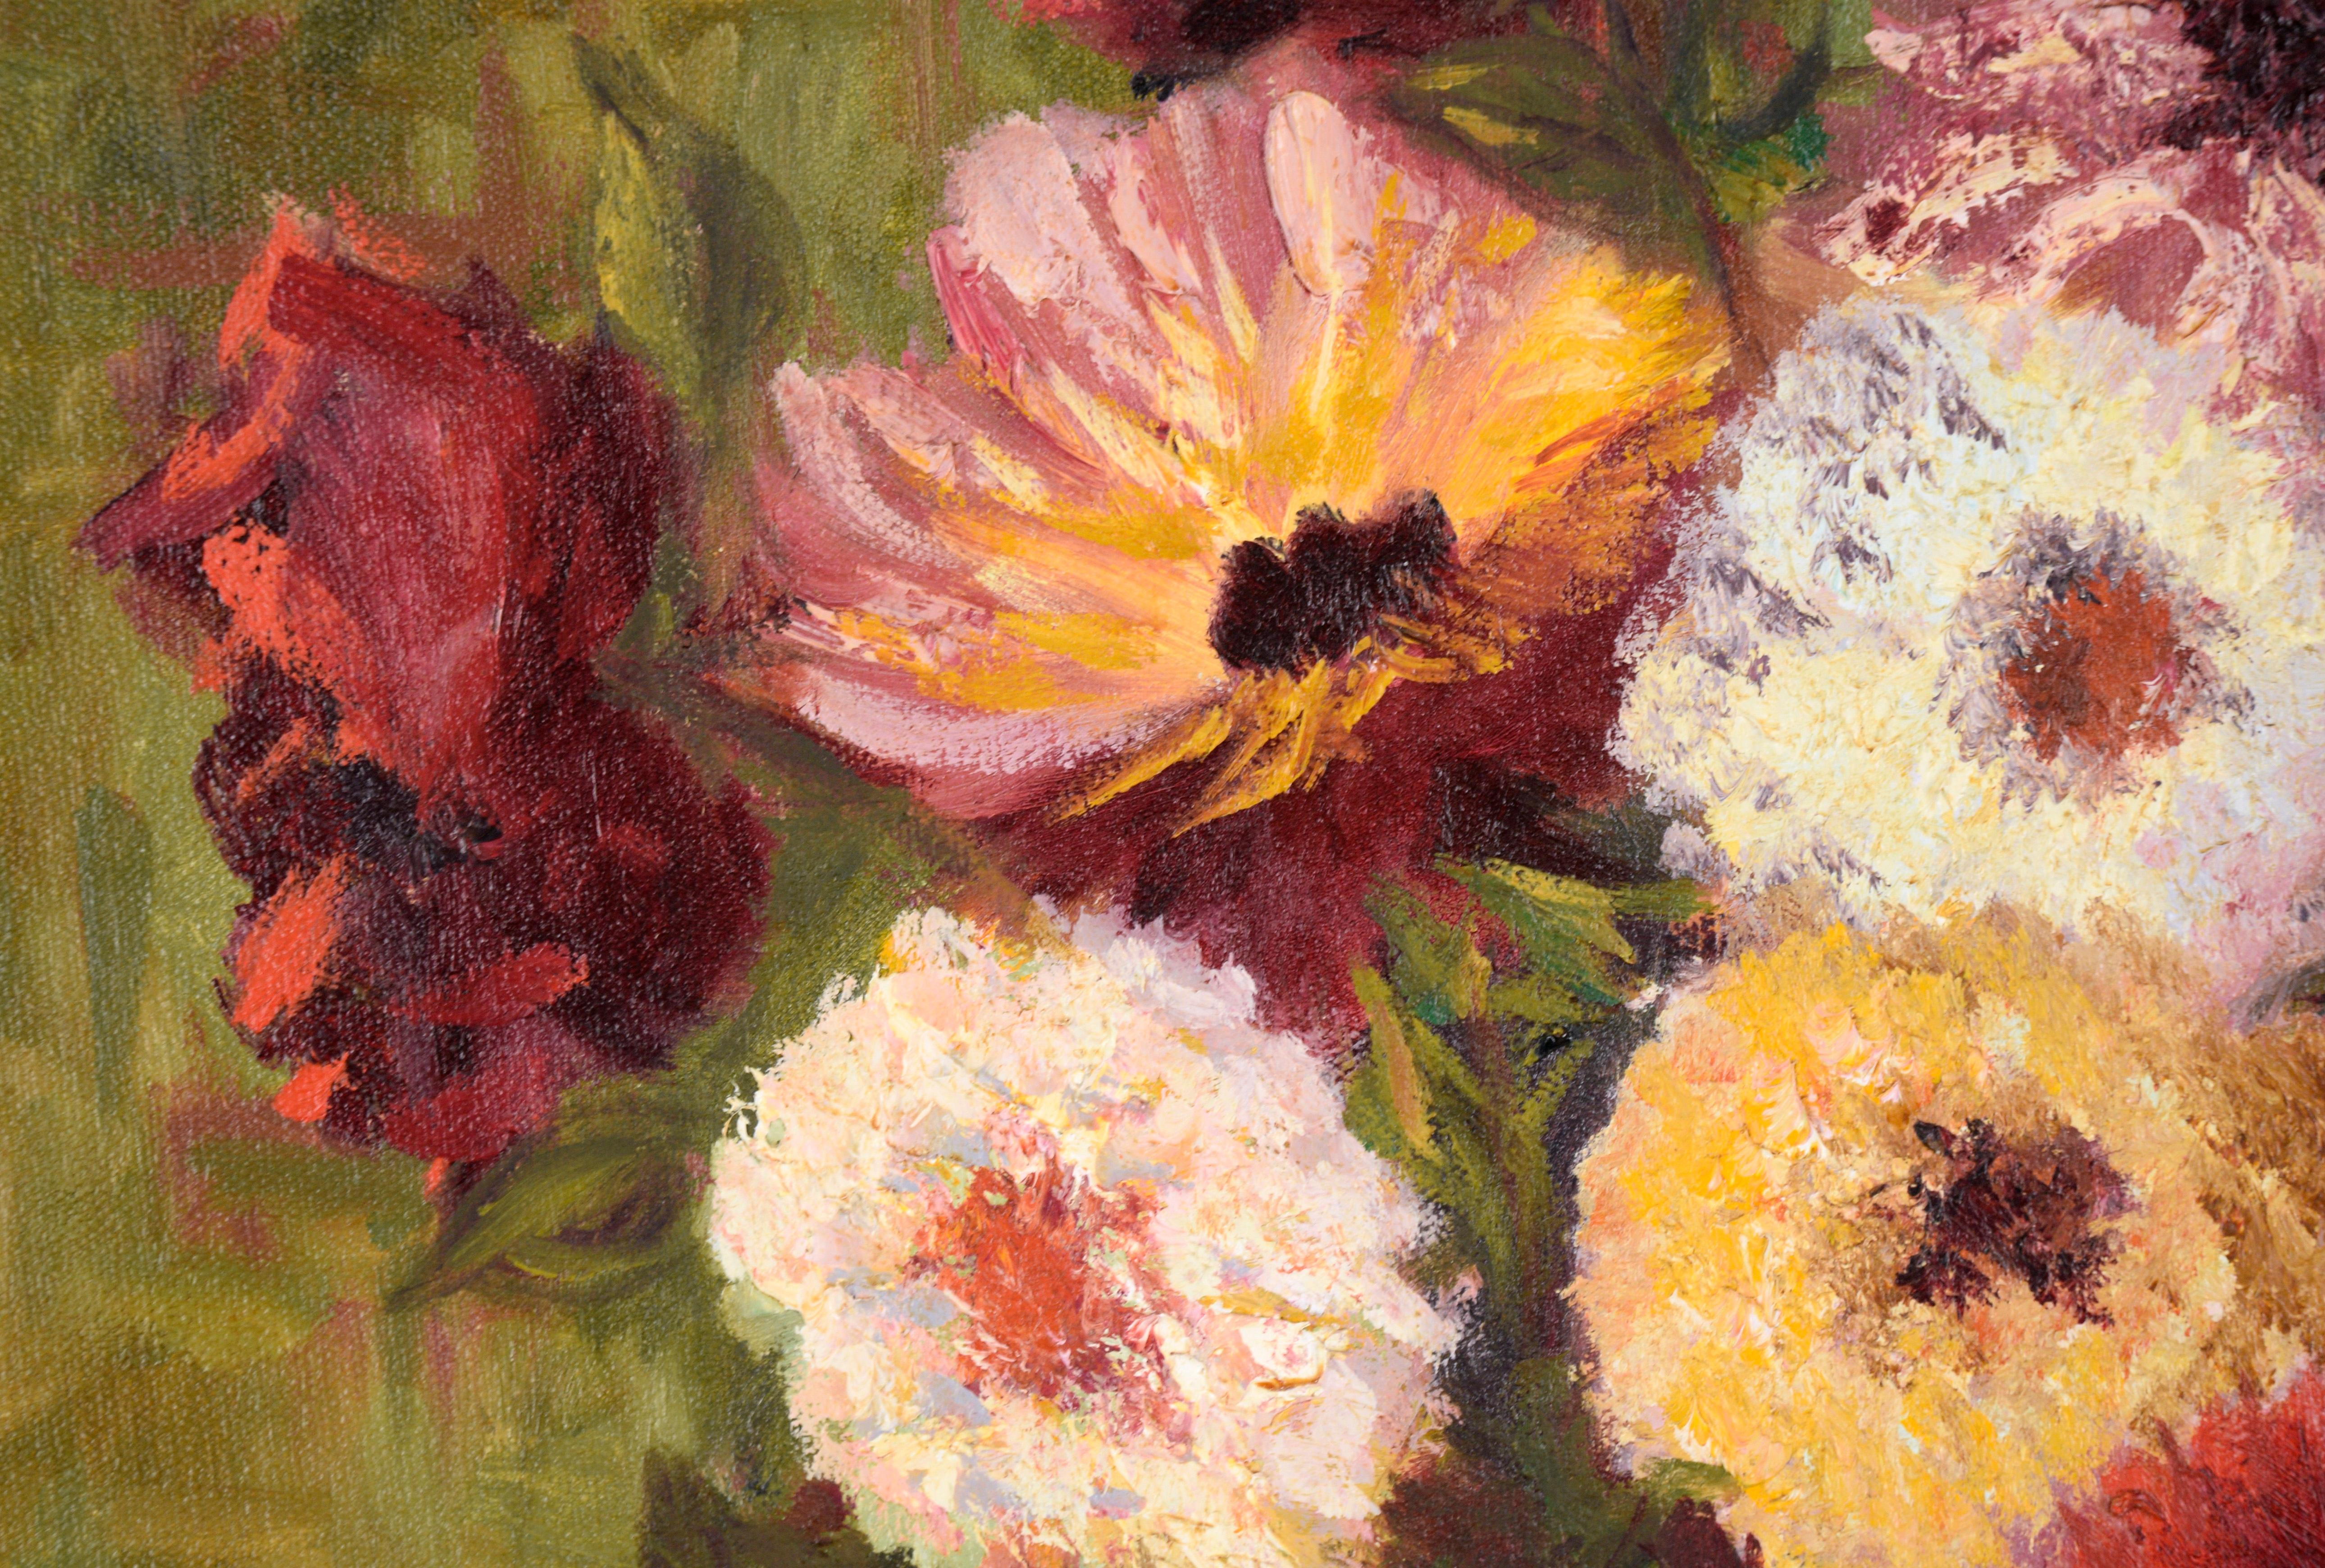 Floral Still Life with Zinnias and Roses - Oil on Canvas

Bright still life in a classic style by an unknown artist (20th Century). Red, pink, white, and yellow flowers sit in a brown vase. The flowers are subtly textured, adding depth to the piece.